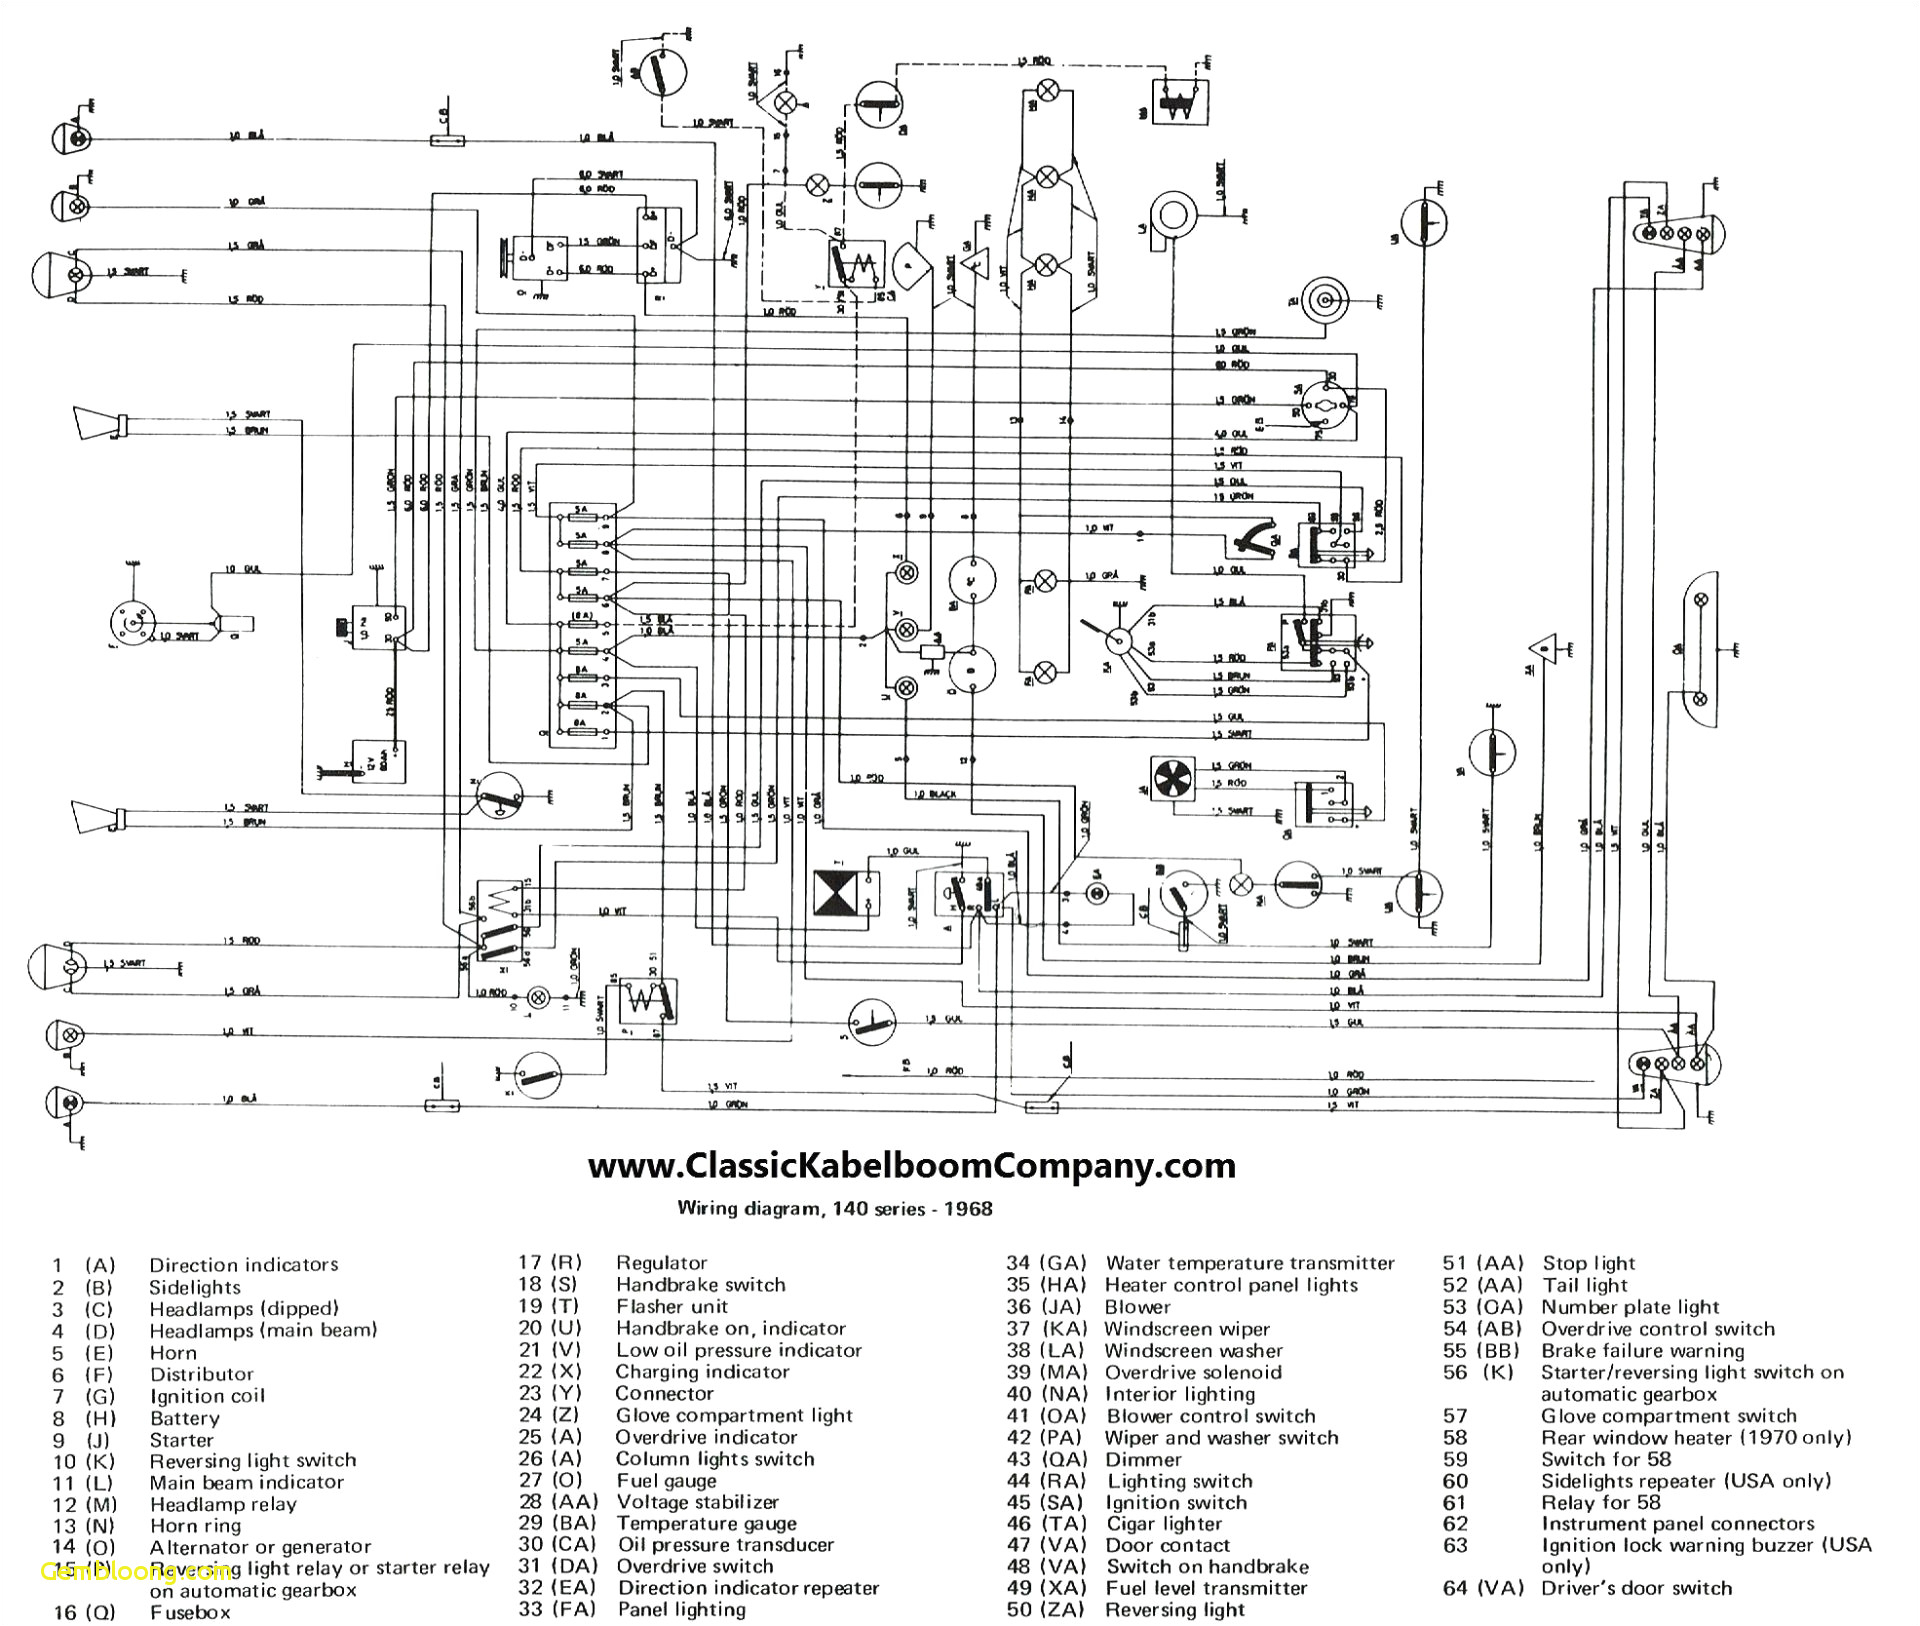 dimmer switch wiring diagram free download wiring diagram view dimmer switch wiring diagram free download